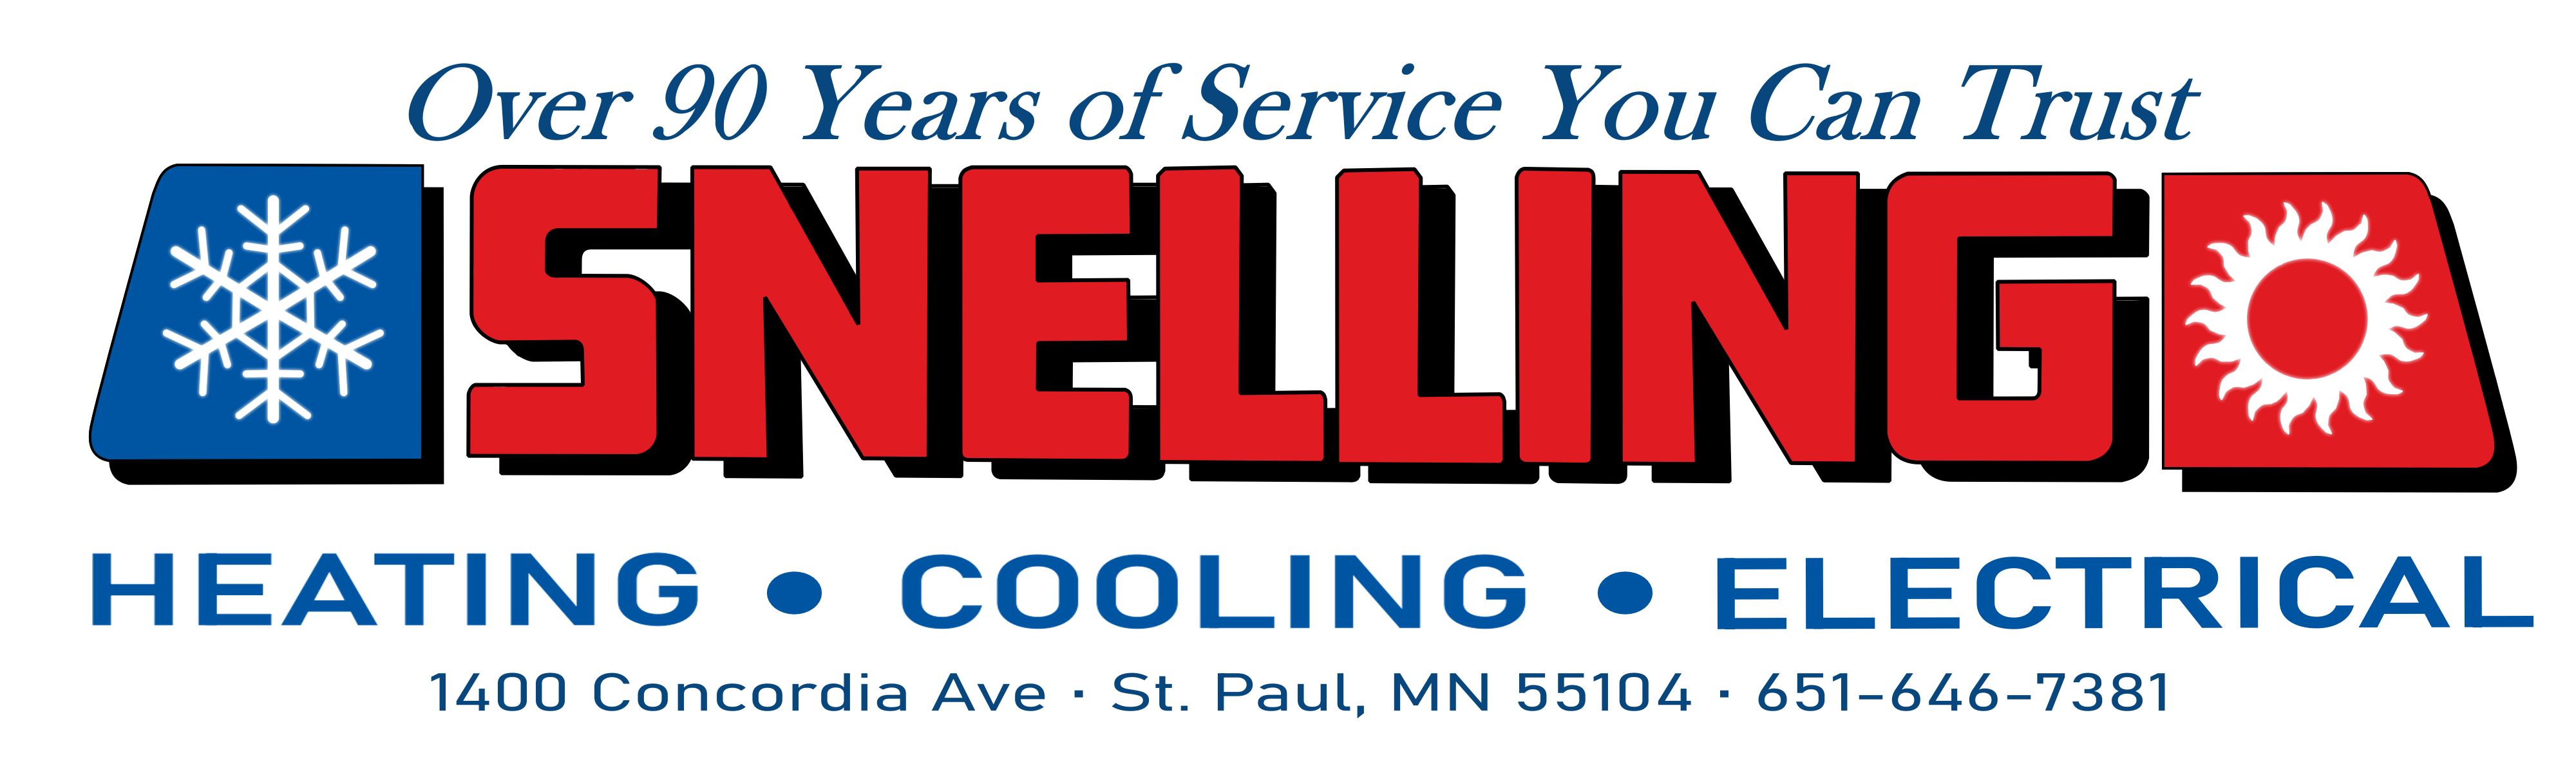 LOGO - Snelling Full Adress and Info - Copy.png